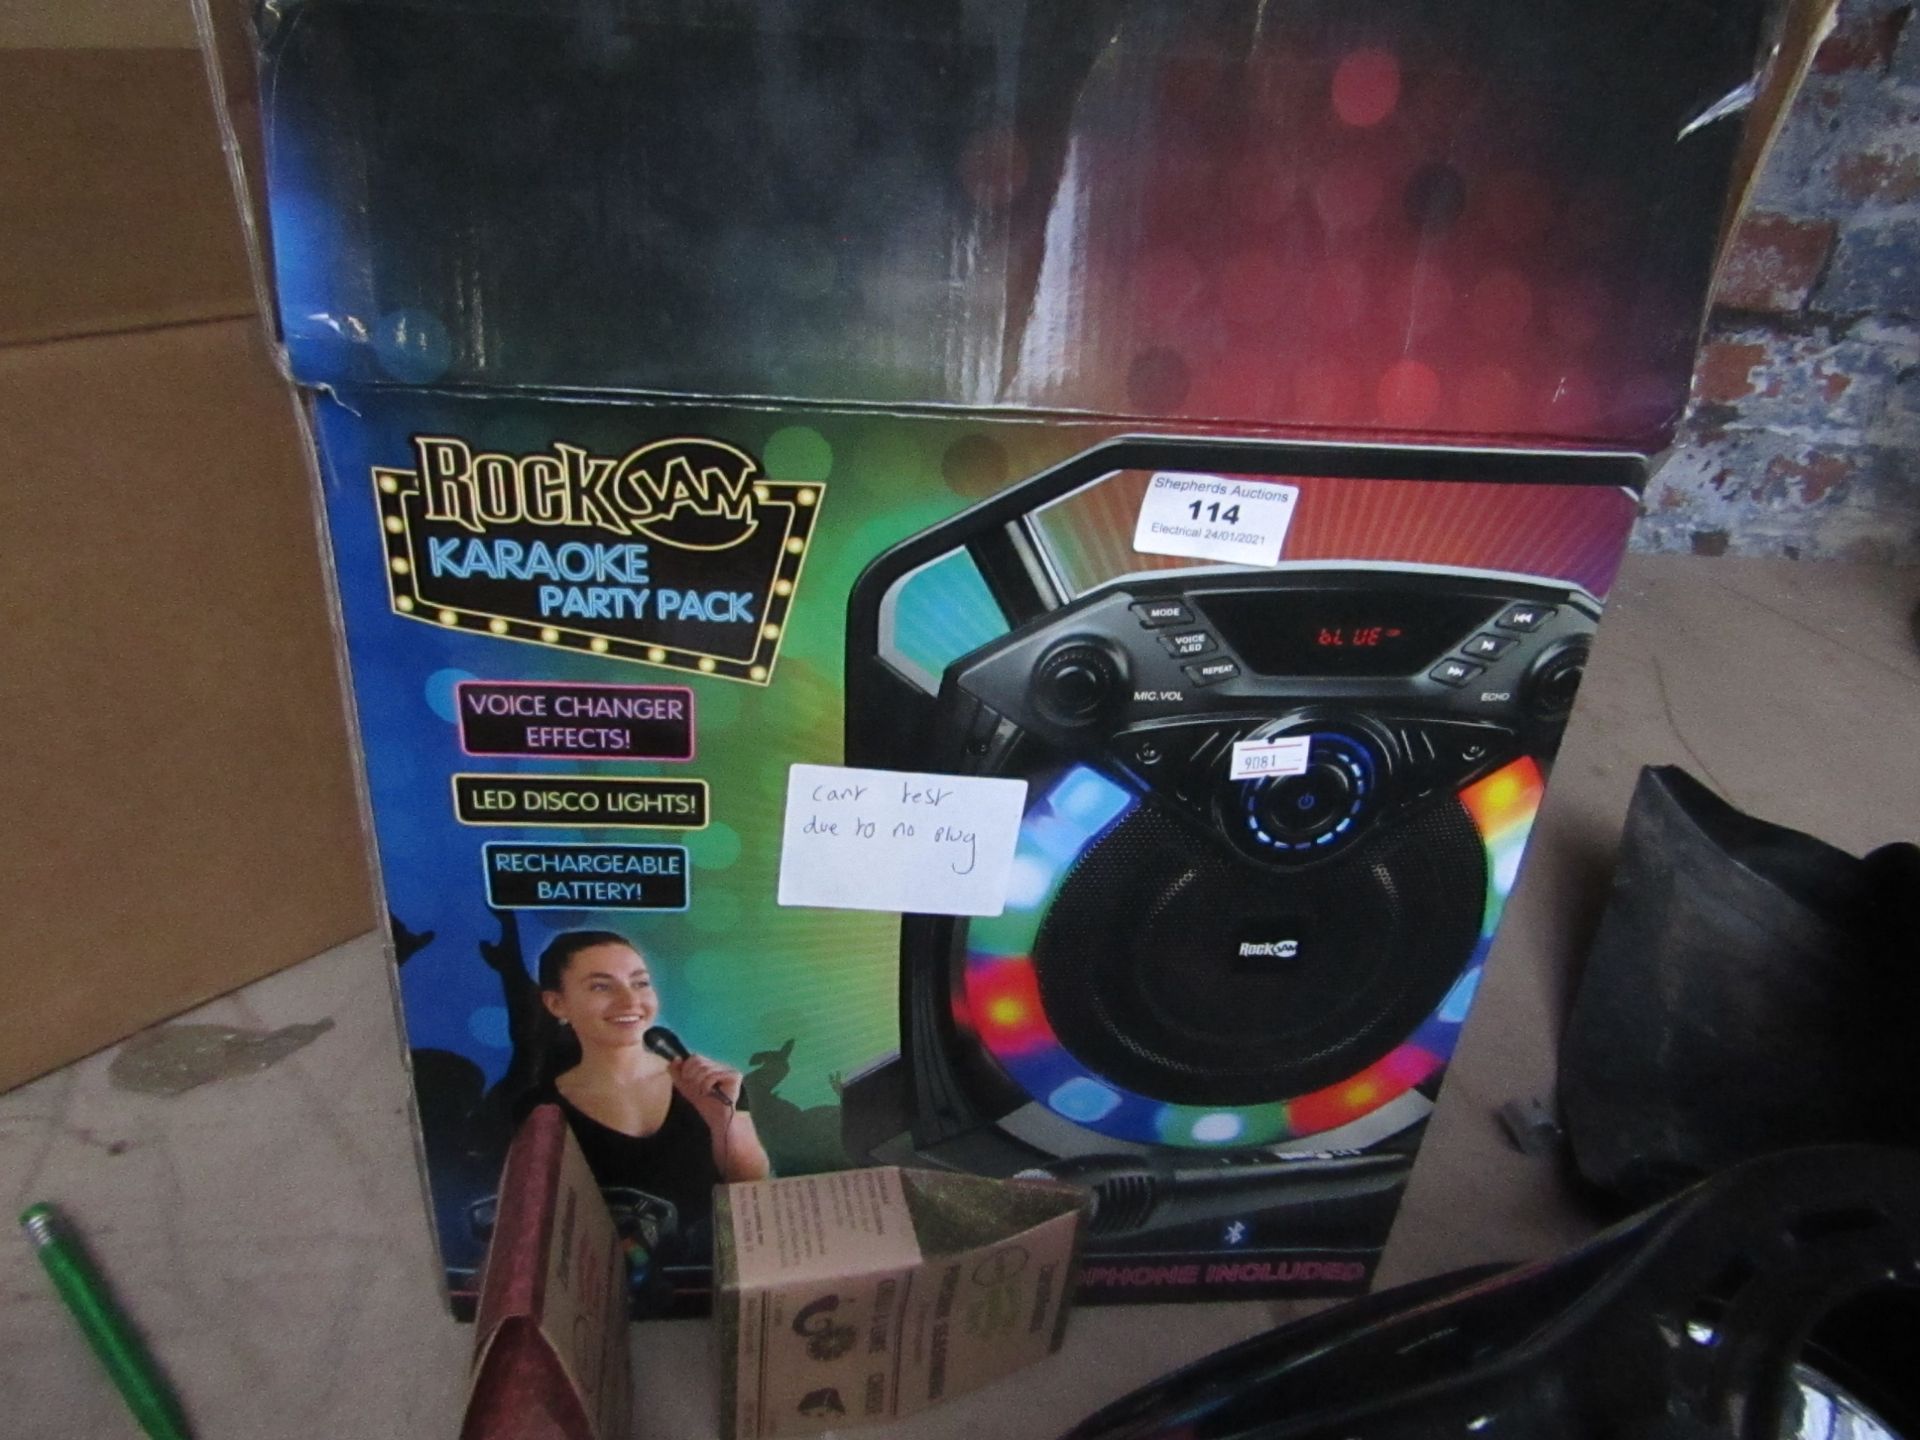 RockJam n Karaoke Party Pack untested due to no plug and boxed